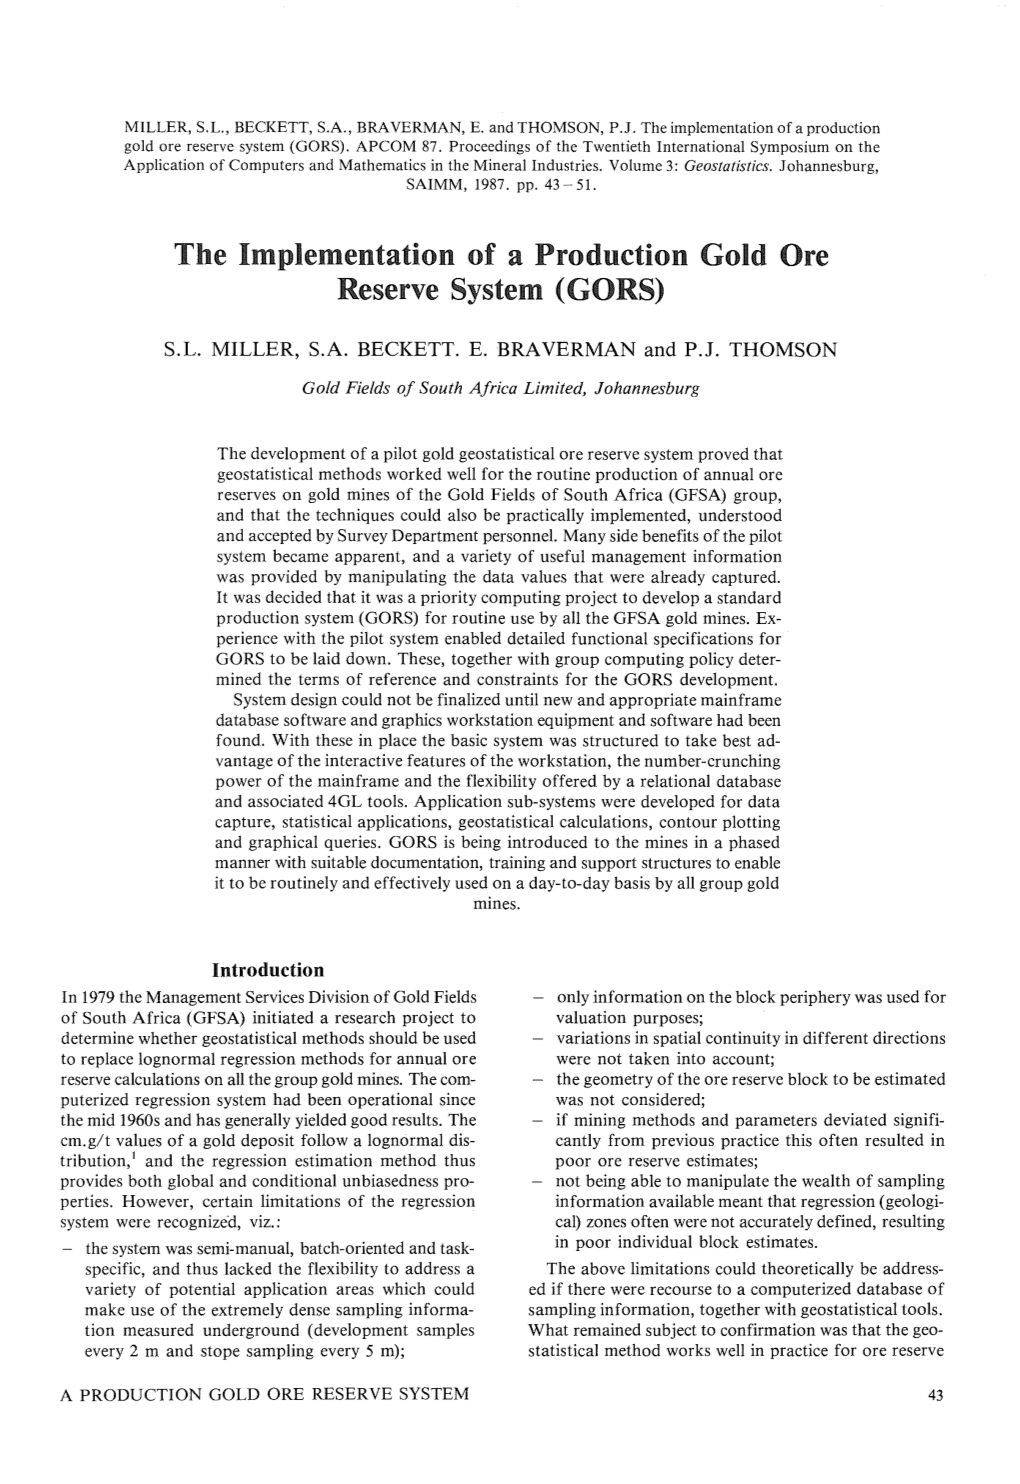 The Implementation of a Production Gold Ore Reserve System (GORS)